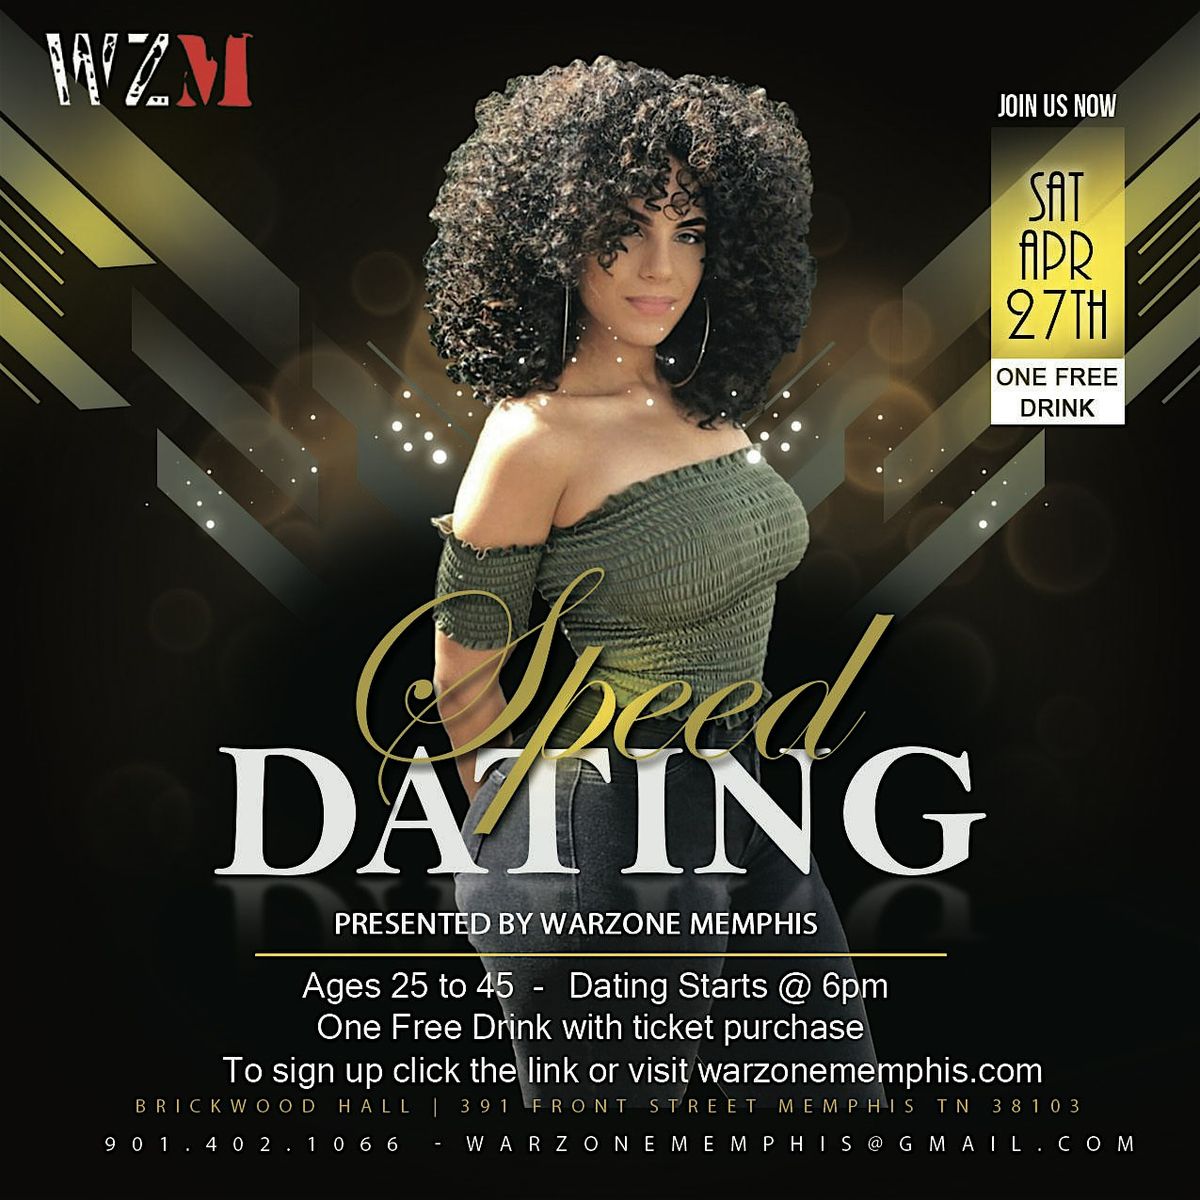 Speed Dating Event by Warzone Memphis